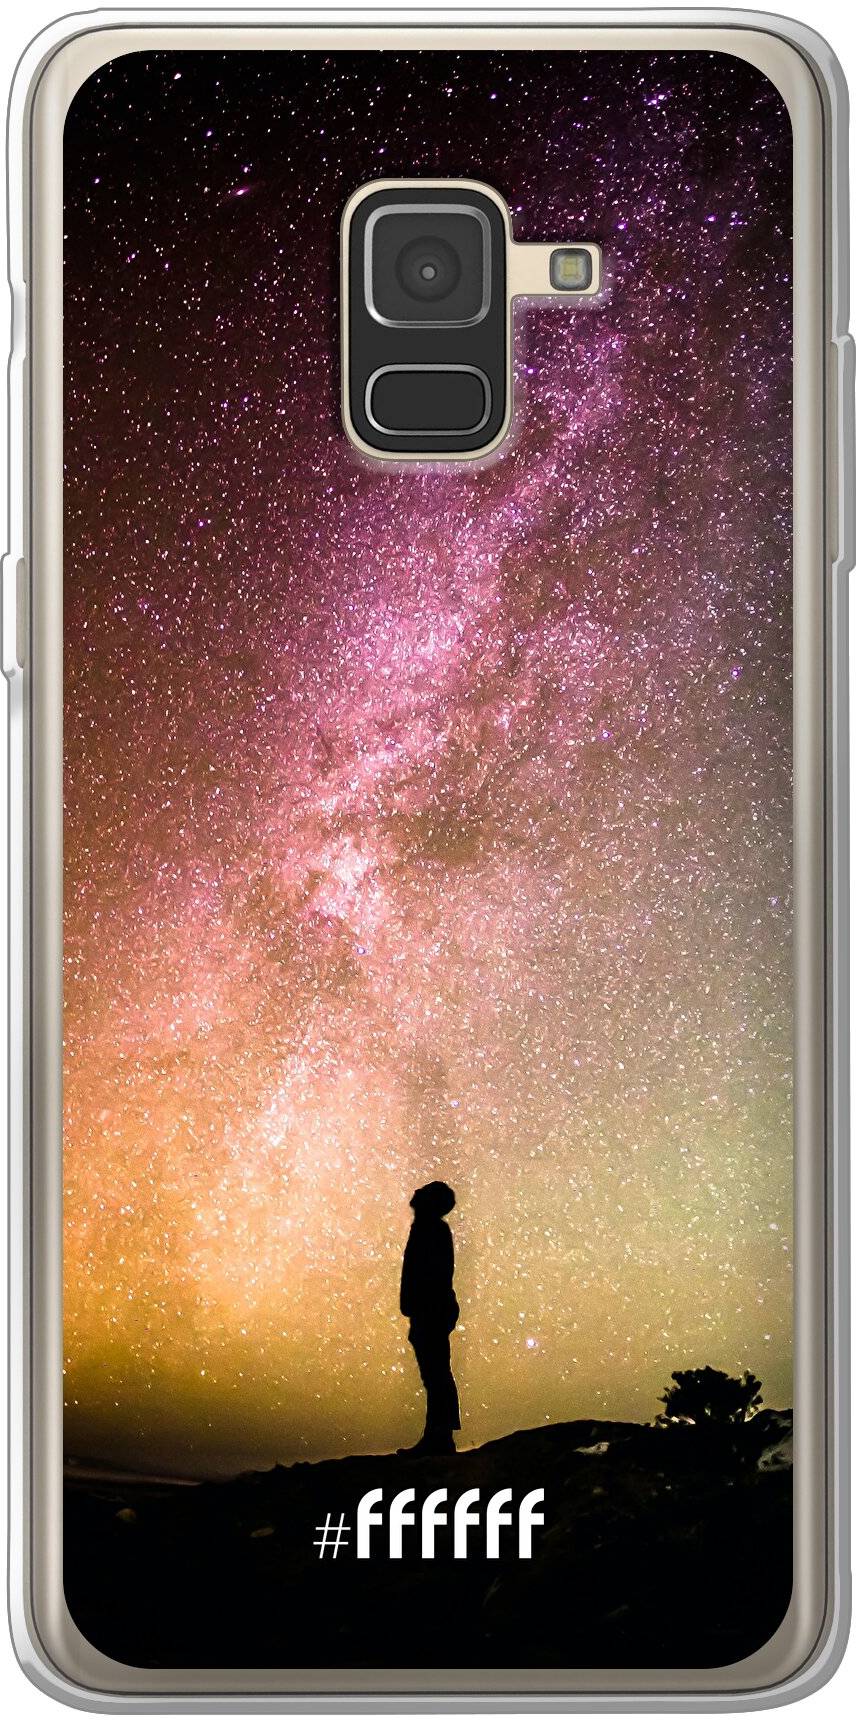 Watching the Stars Galaxy A8 (2018)